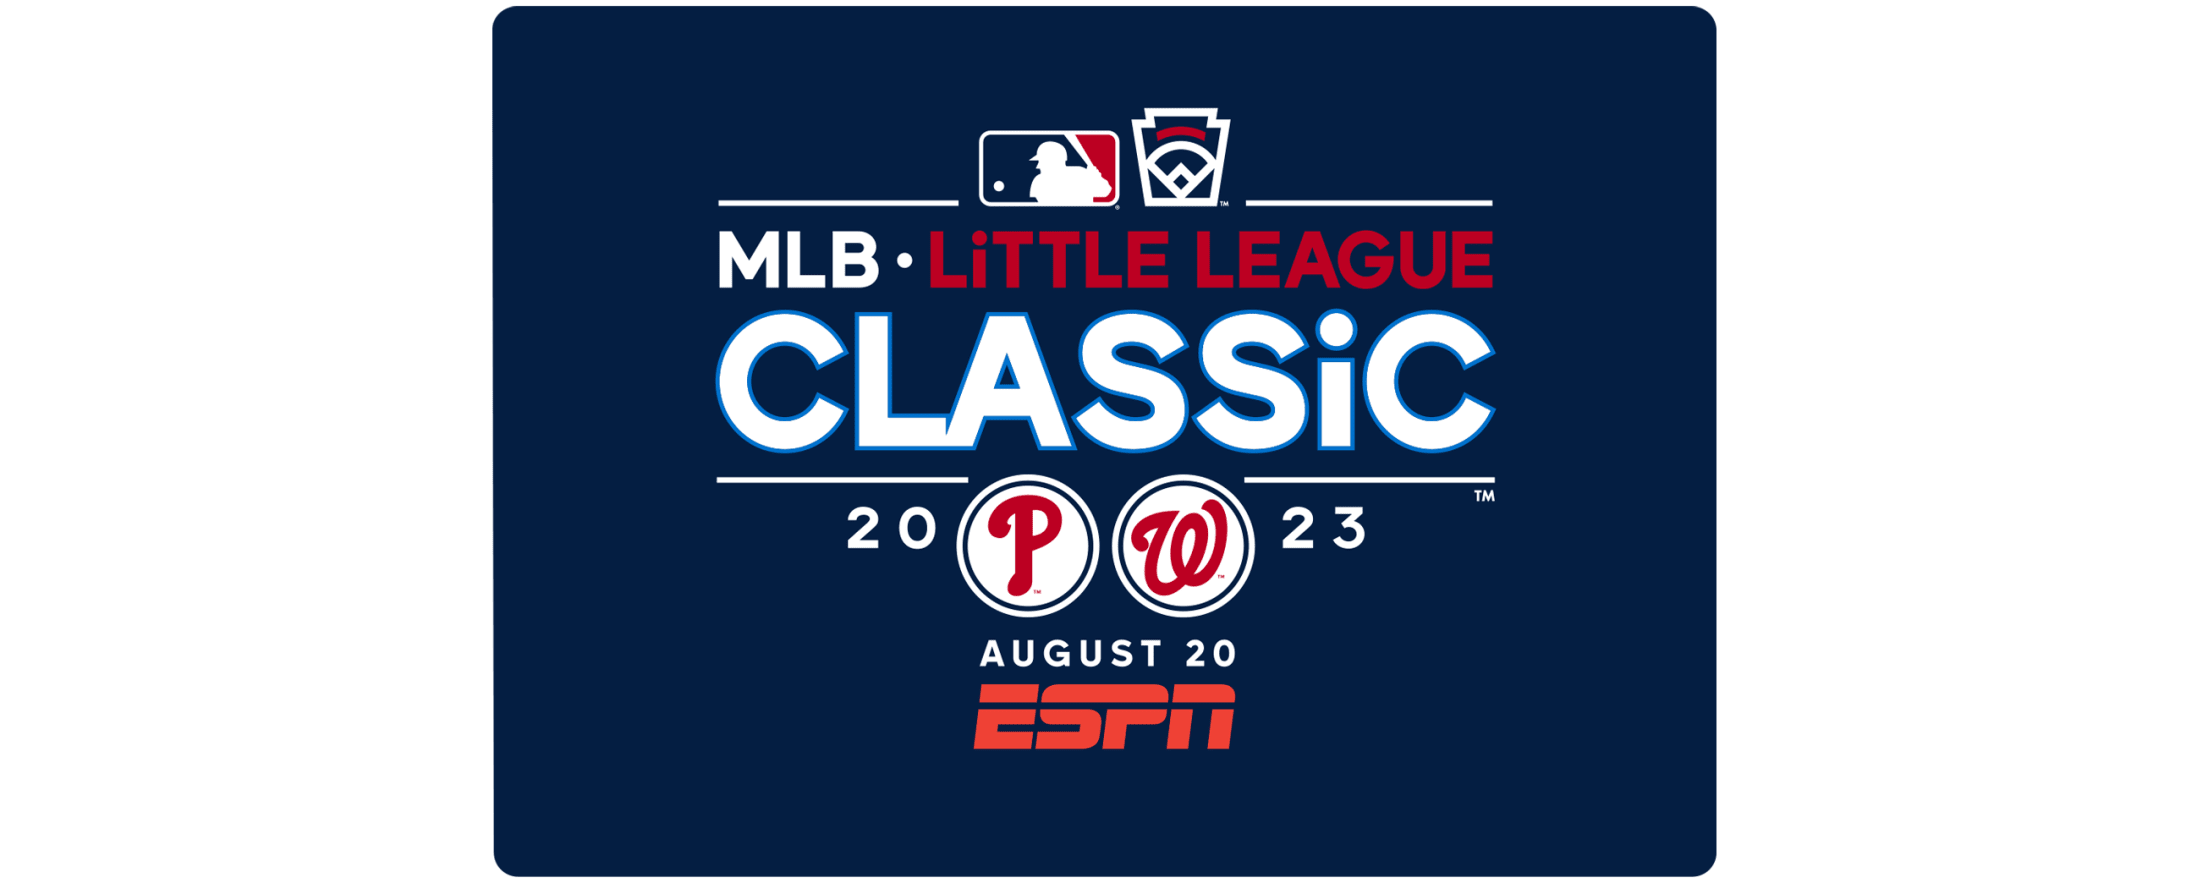 The Little League Classic was great and should be an annual